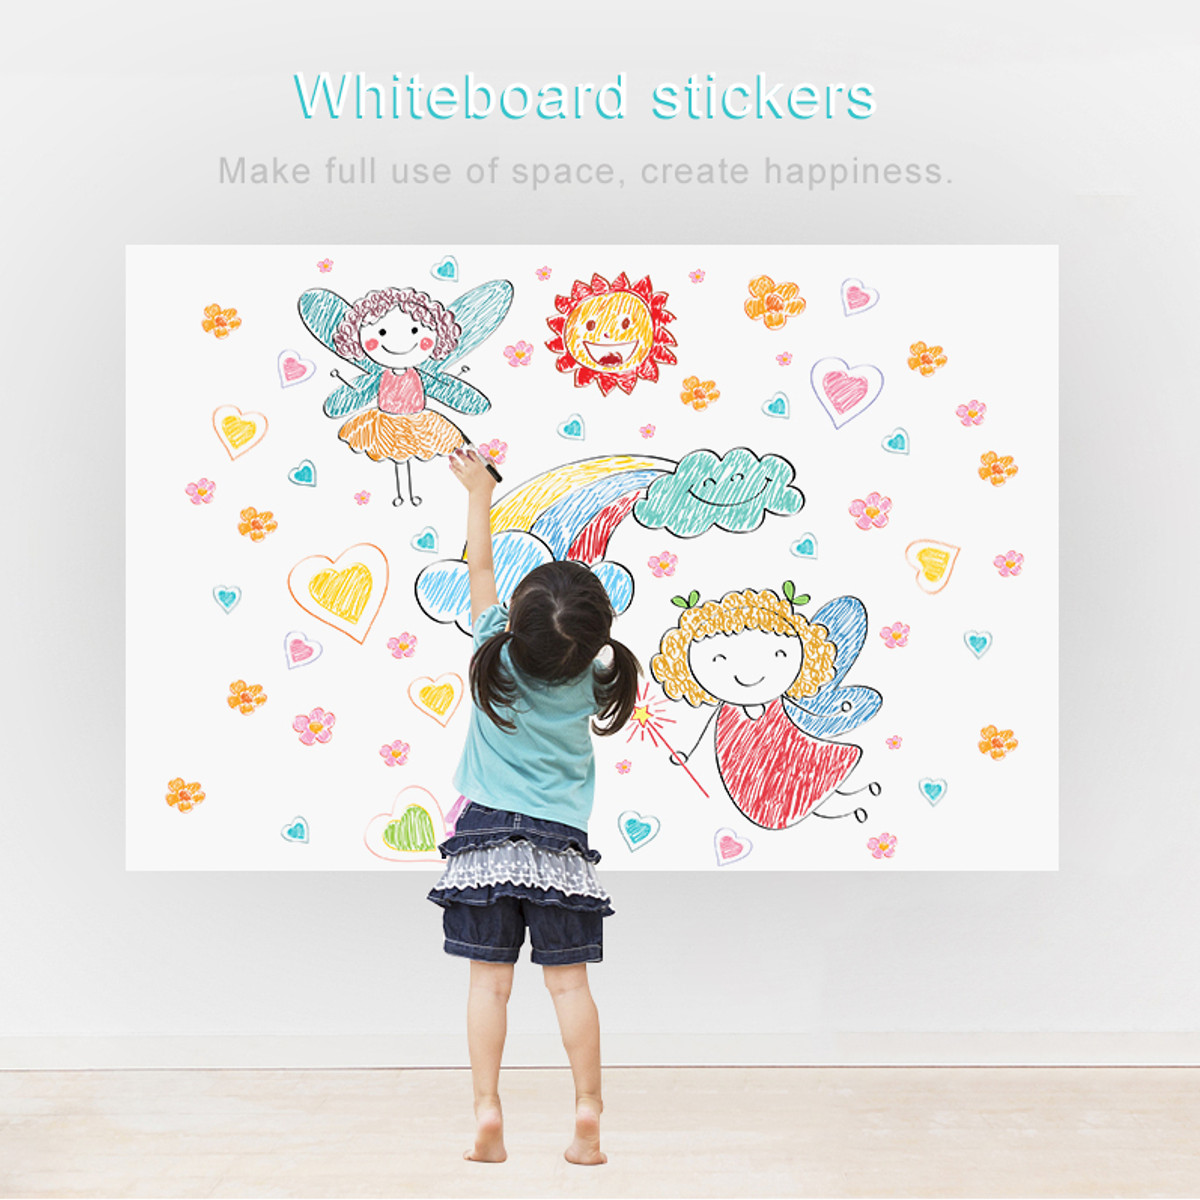 Self-adhesive-Whiteboard-Sticker-Waterproof-Movable-Kid-Erasable-Roll-Up-Message-Wall-Table-Sticker-1626767-4